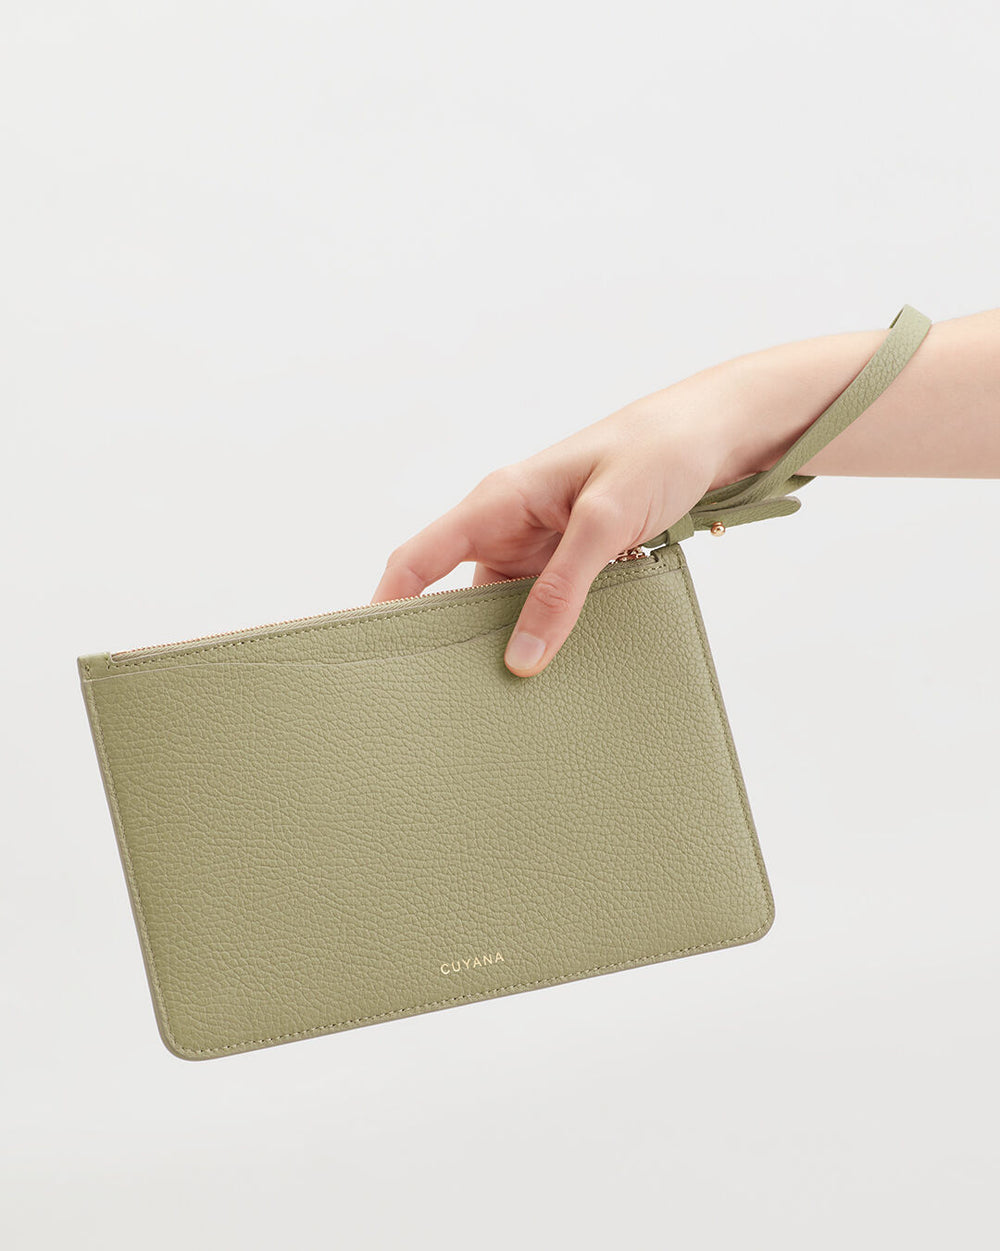 Hand holding a small clutch bag